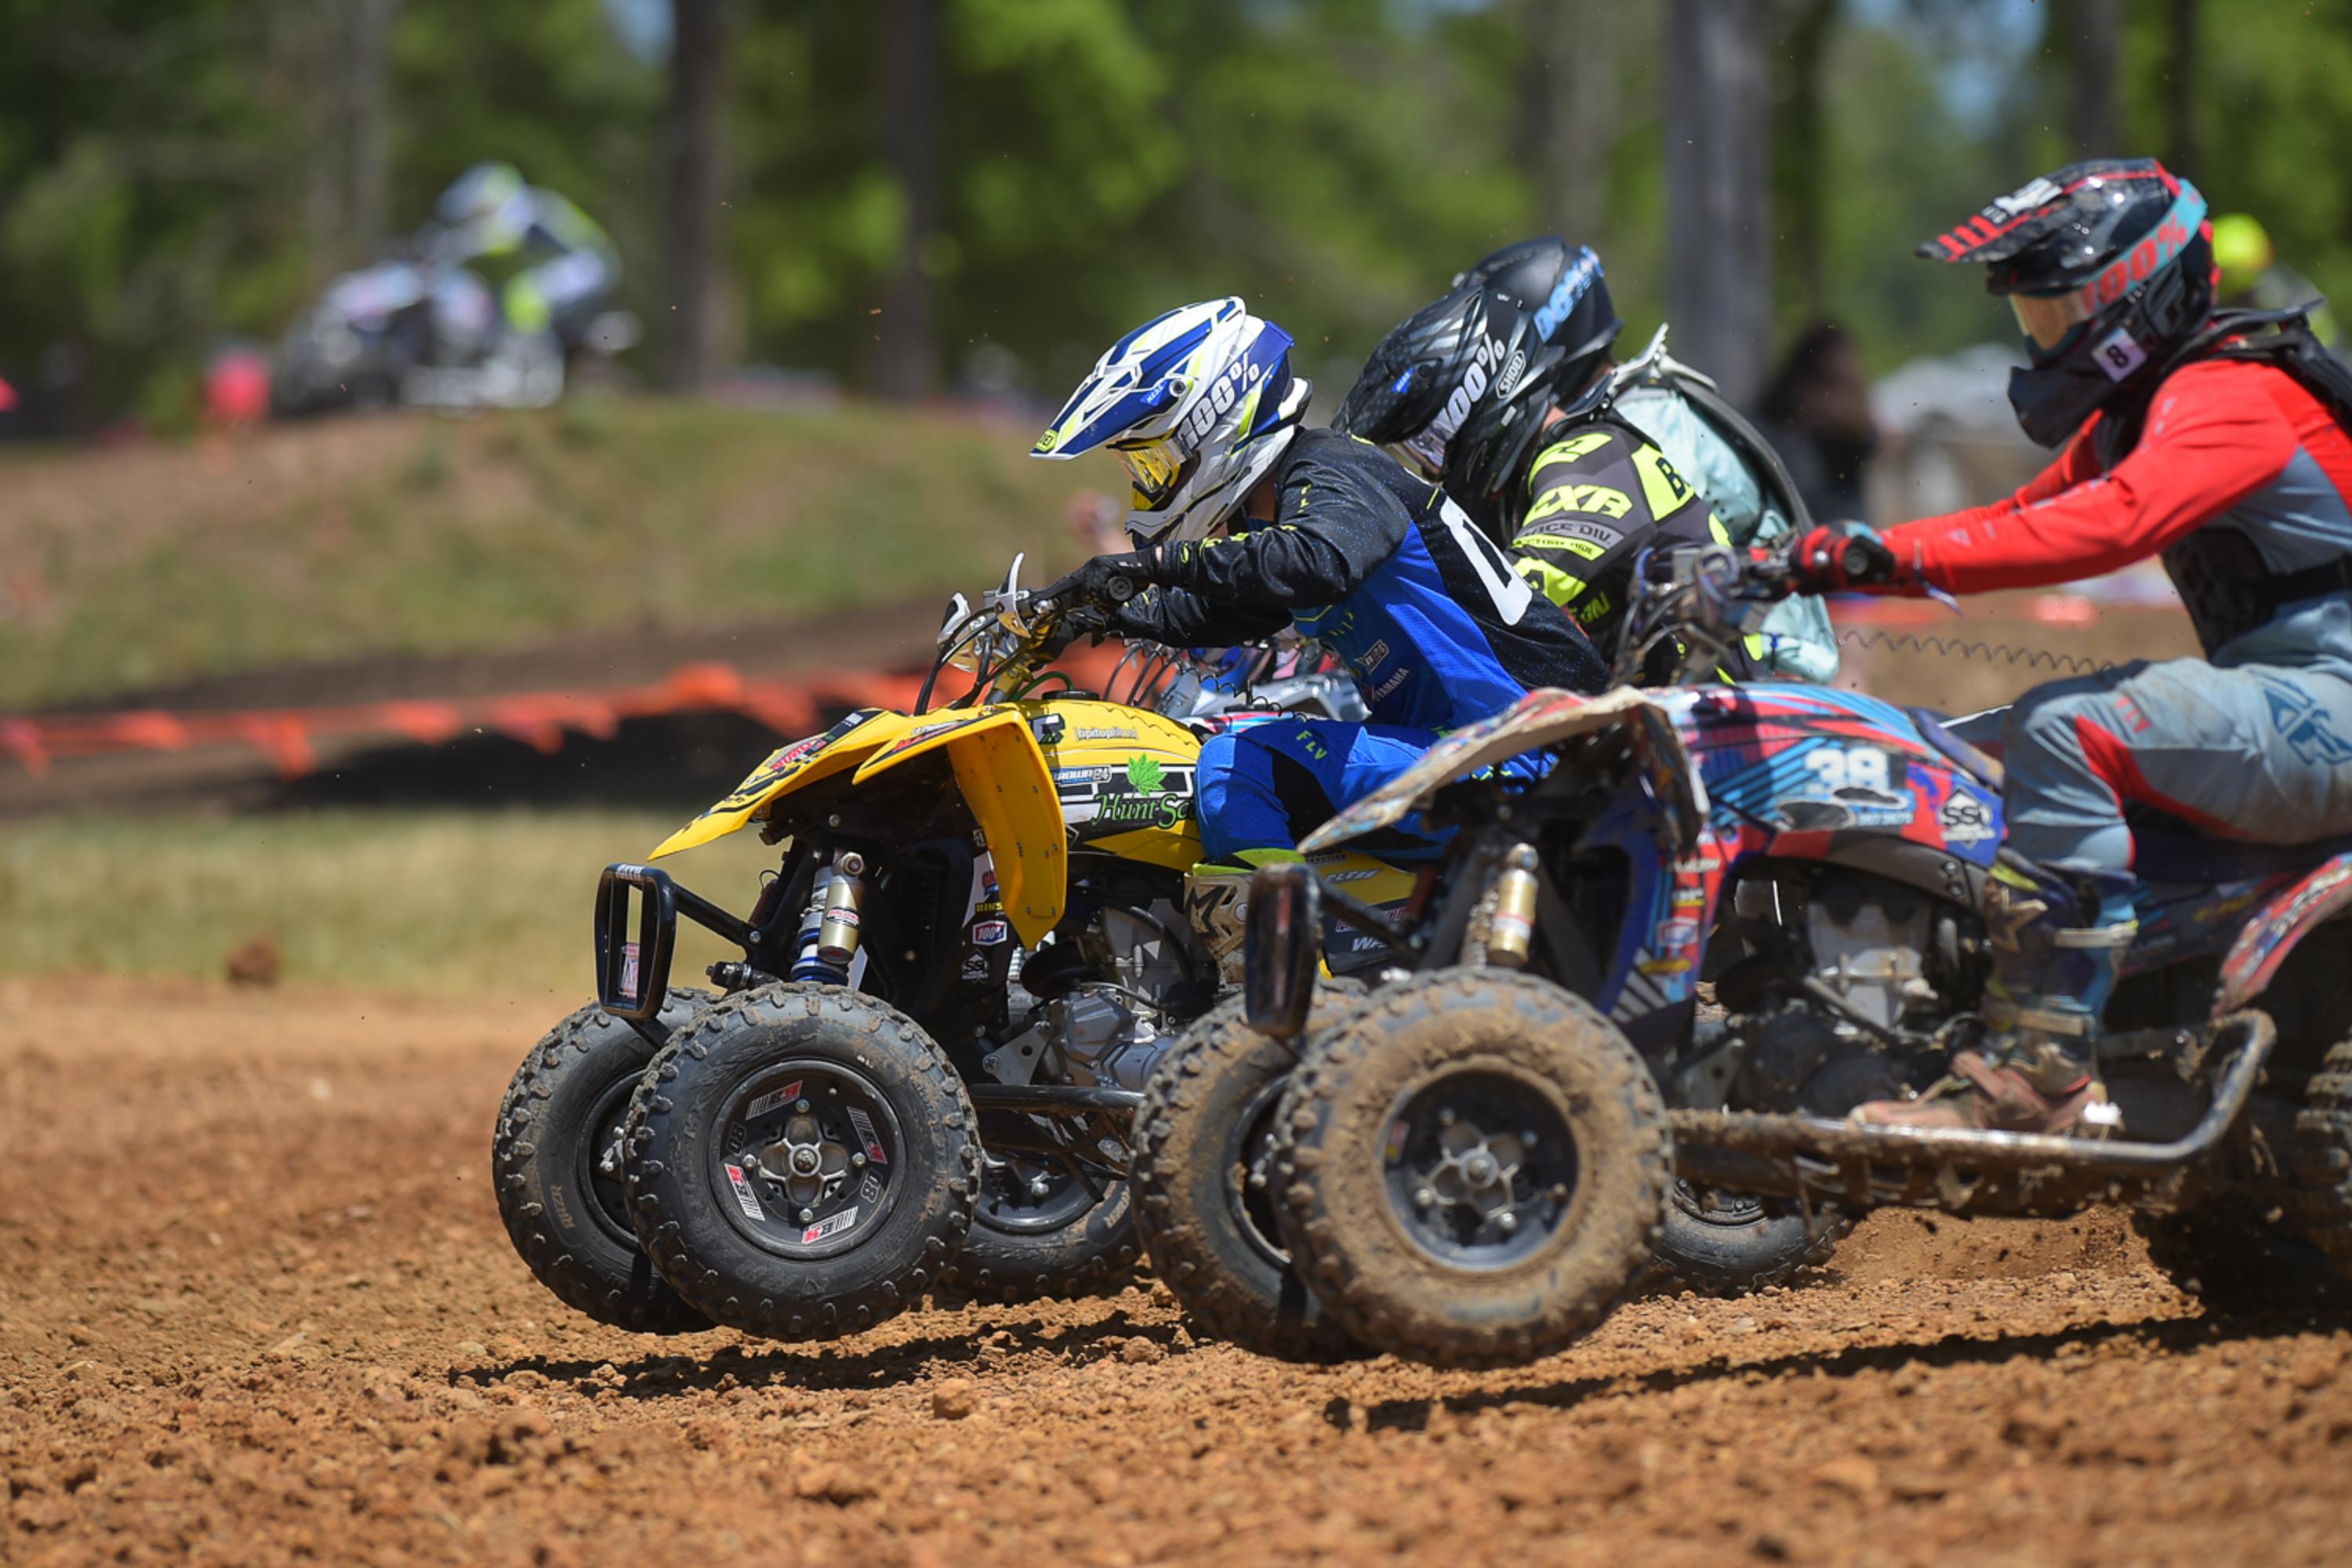 RLT Competition Bulletin 2020-16: Updates to Pro Motocross and ATVMX Schedules